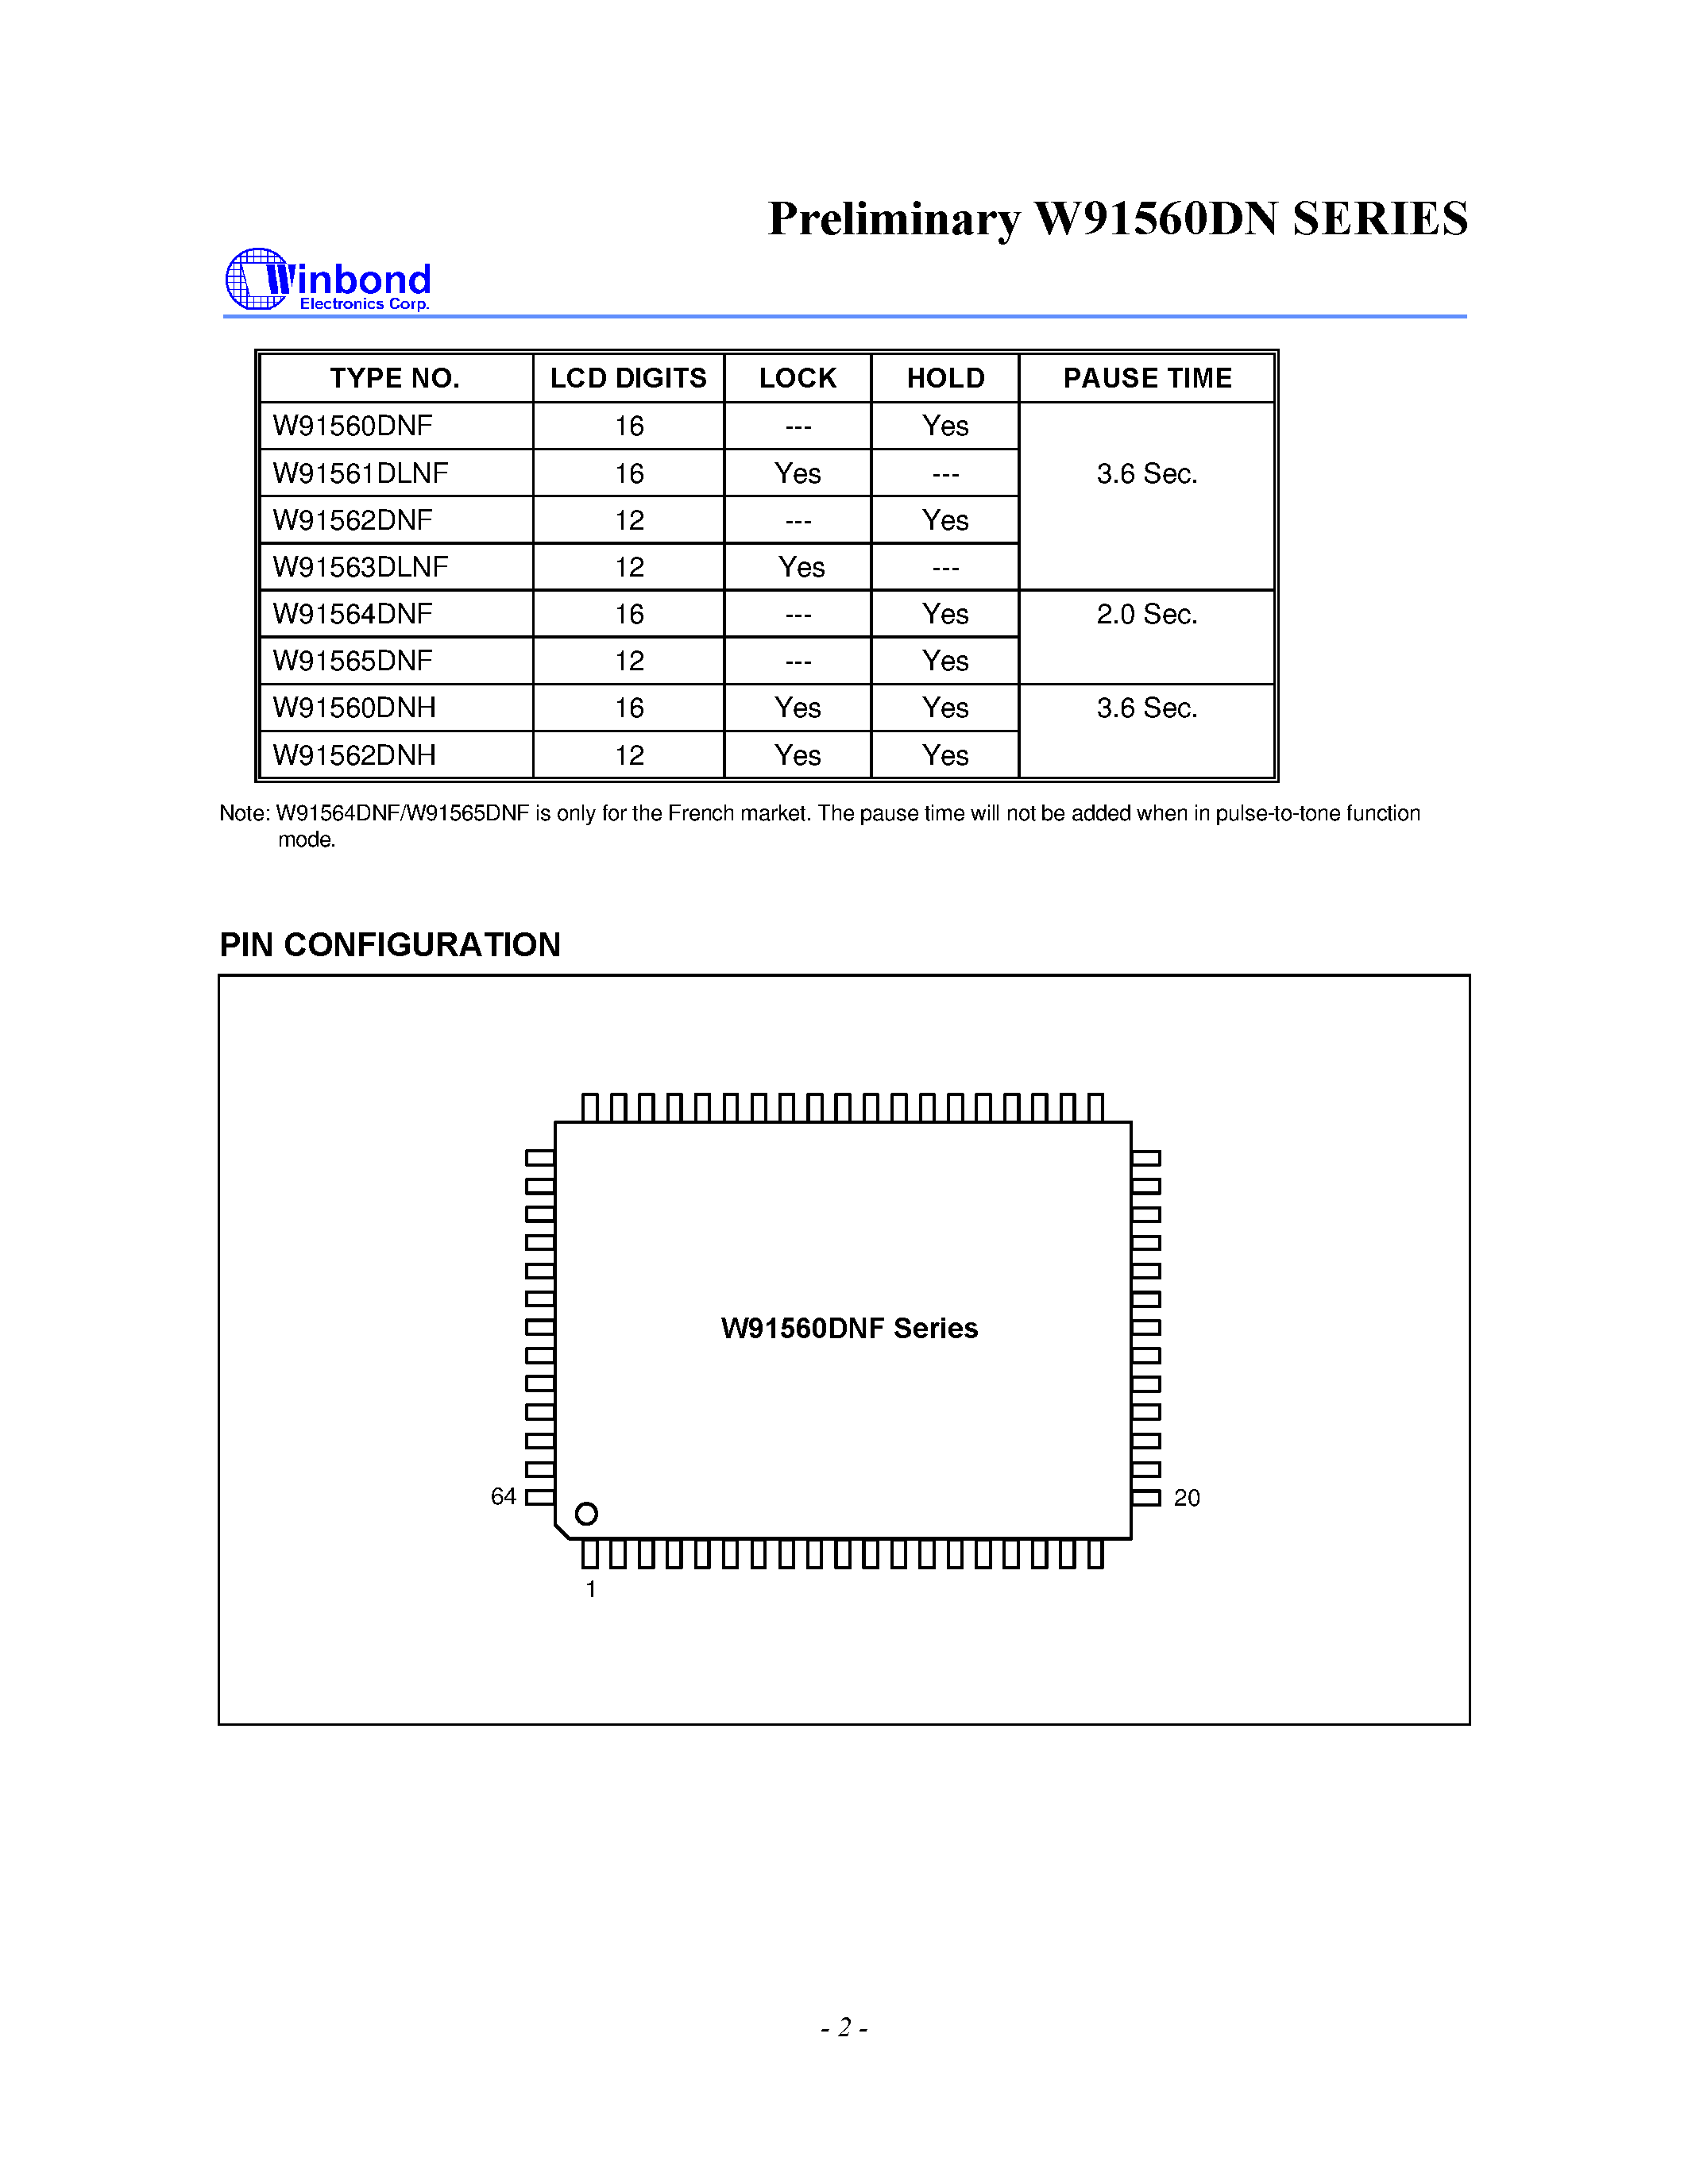 Datasheet W91562DNH - 3-MEMORY TONE/PULSE DIALER WITH RTC AND LCD DISPALY FUNCTIONS page 2